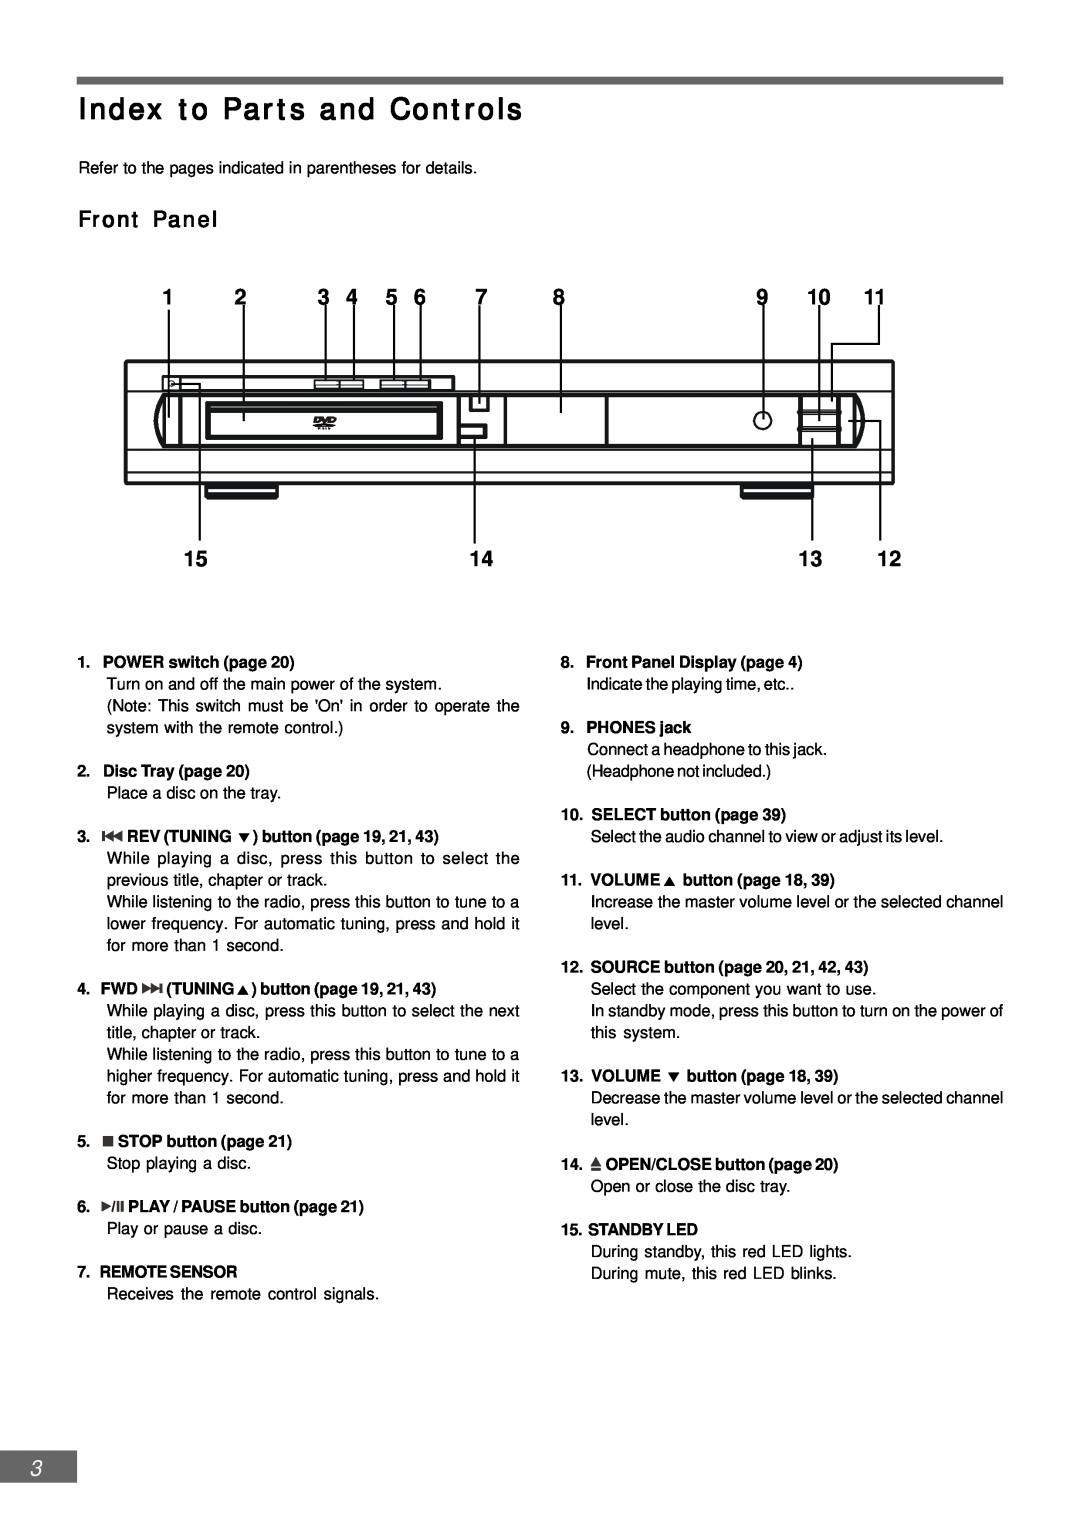 Emerson AV301 owner manual Index to Parts and Controls 